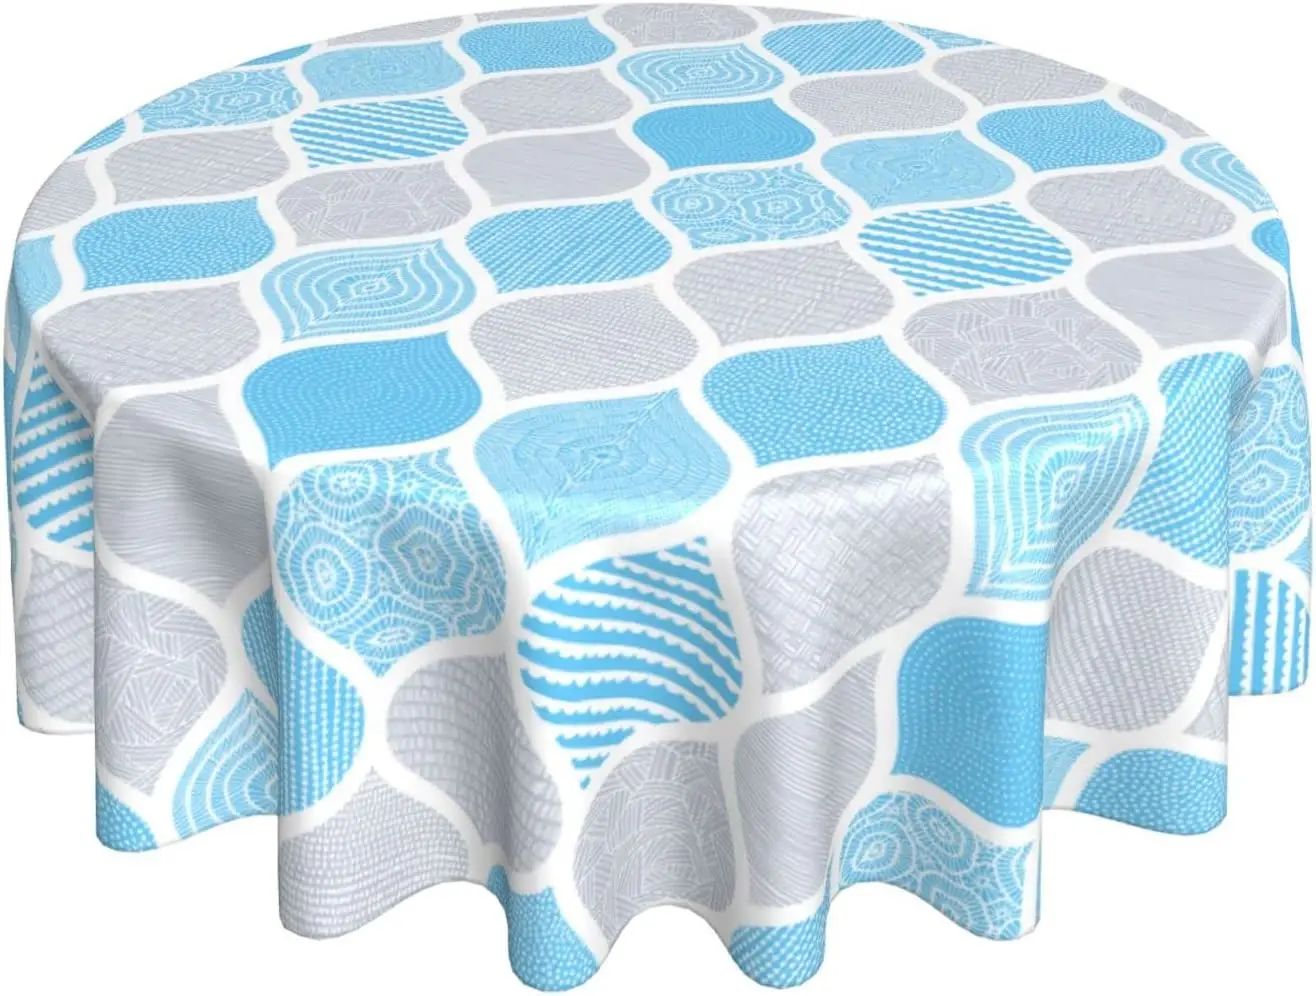 

Grey Teal Round Tablecloth 60 Inch Ruitic Turquoise Blue Table Cloth Waterproof Fabric Modern Moroccan Checked Tablecloths Decor